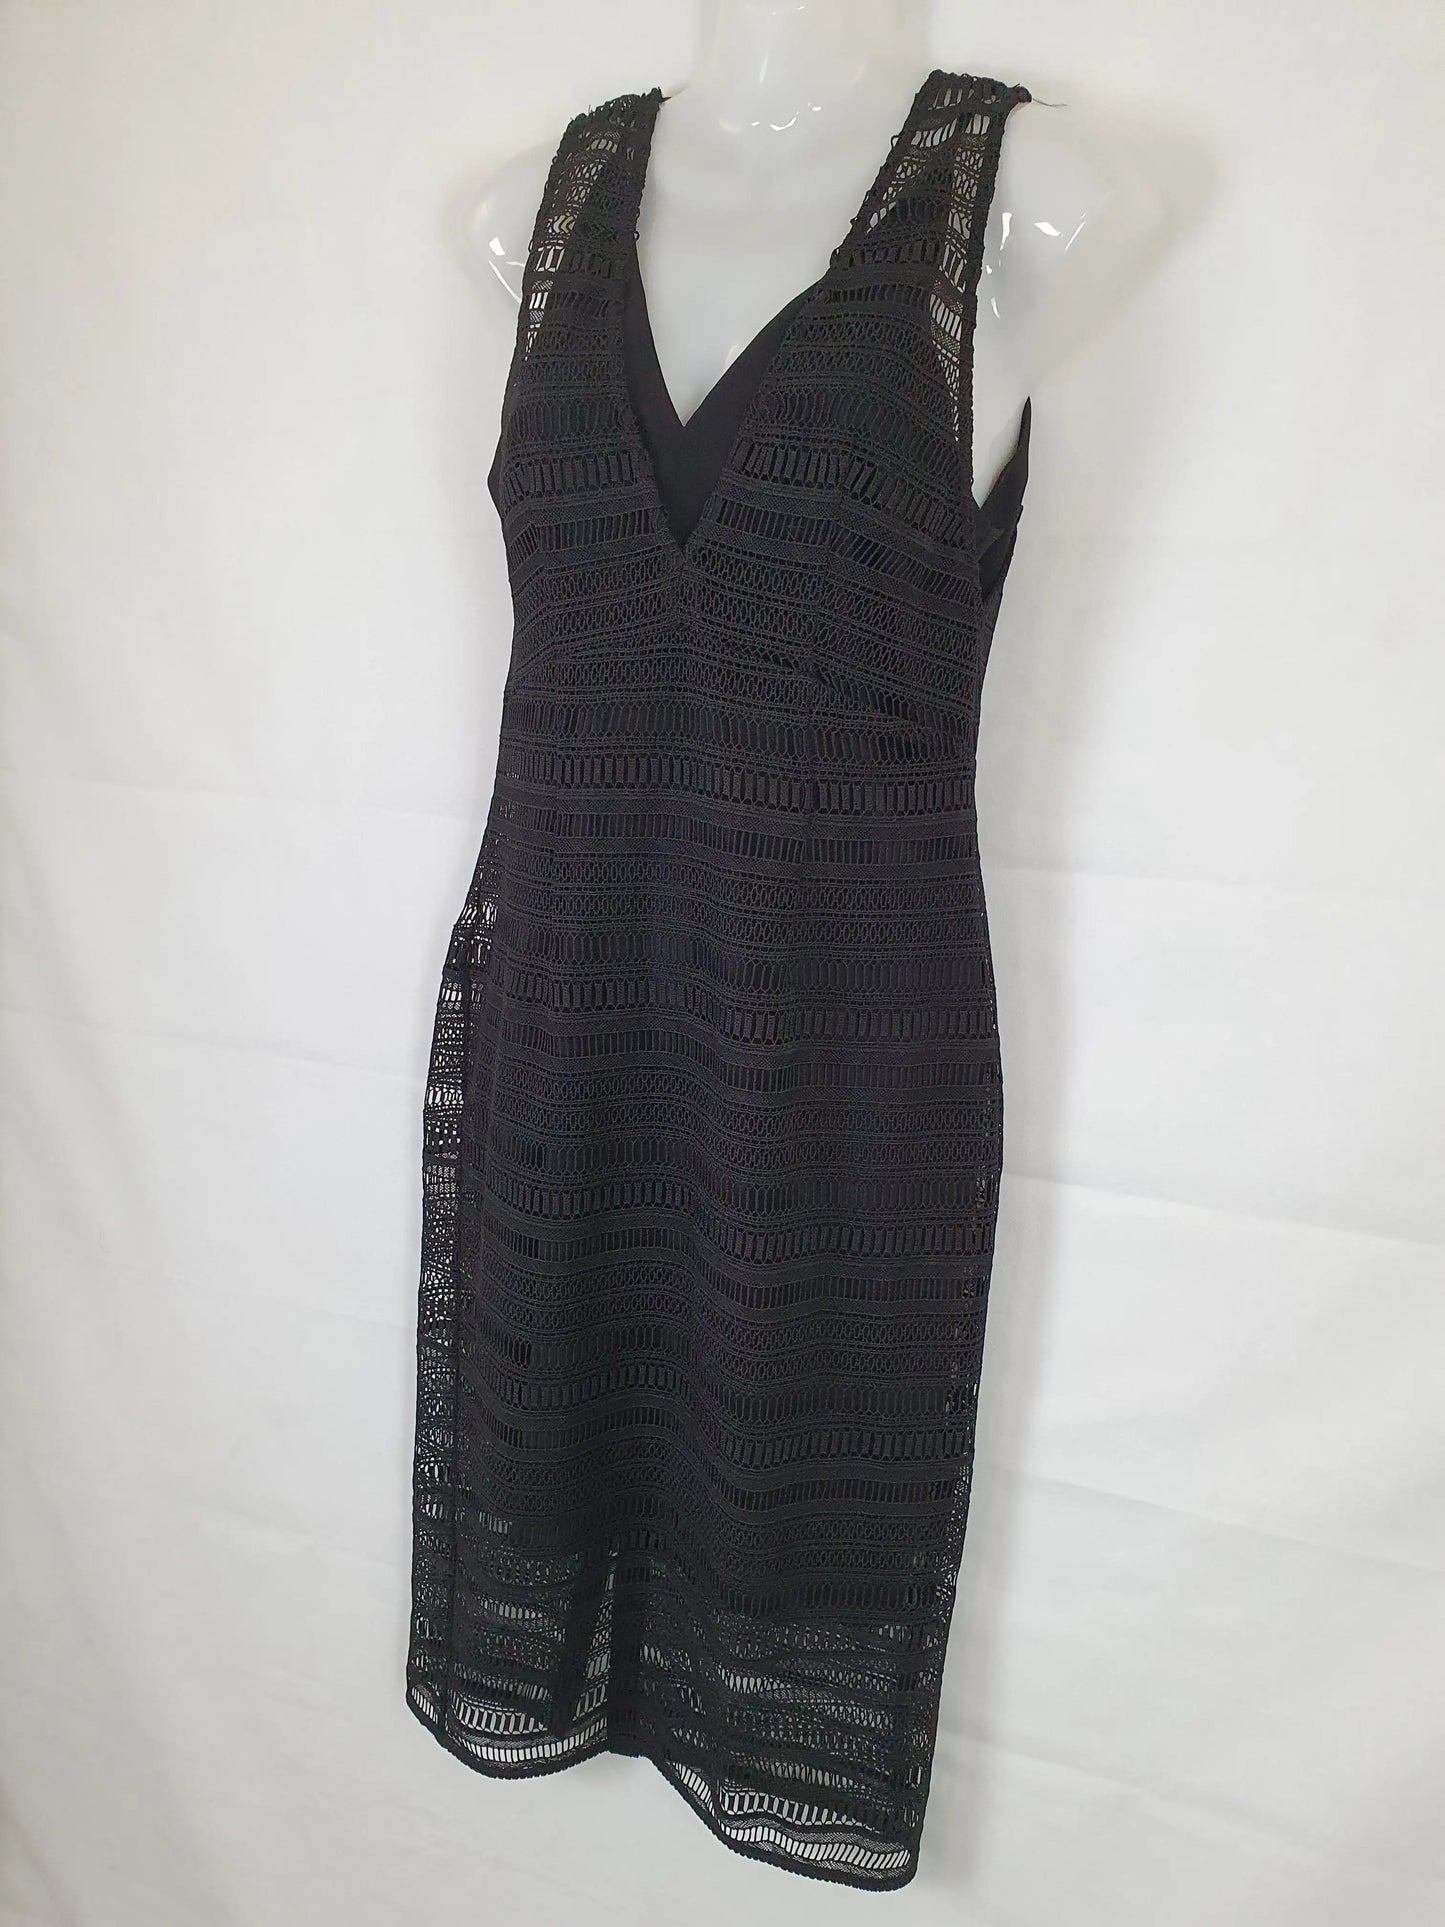 Veronika Maine Layered Midi Dress Size 6 by SwapUp-Second Hand Shop-Thrift Store-Op Shop 